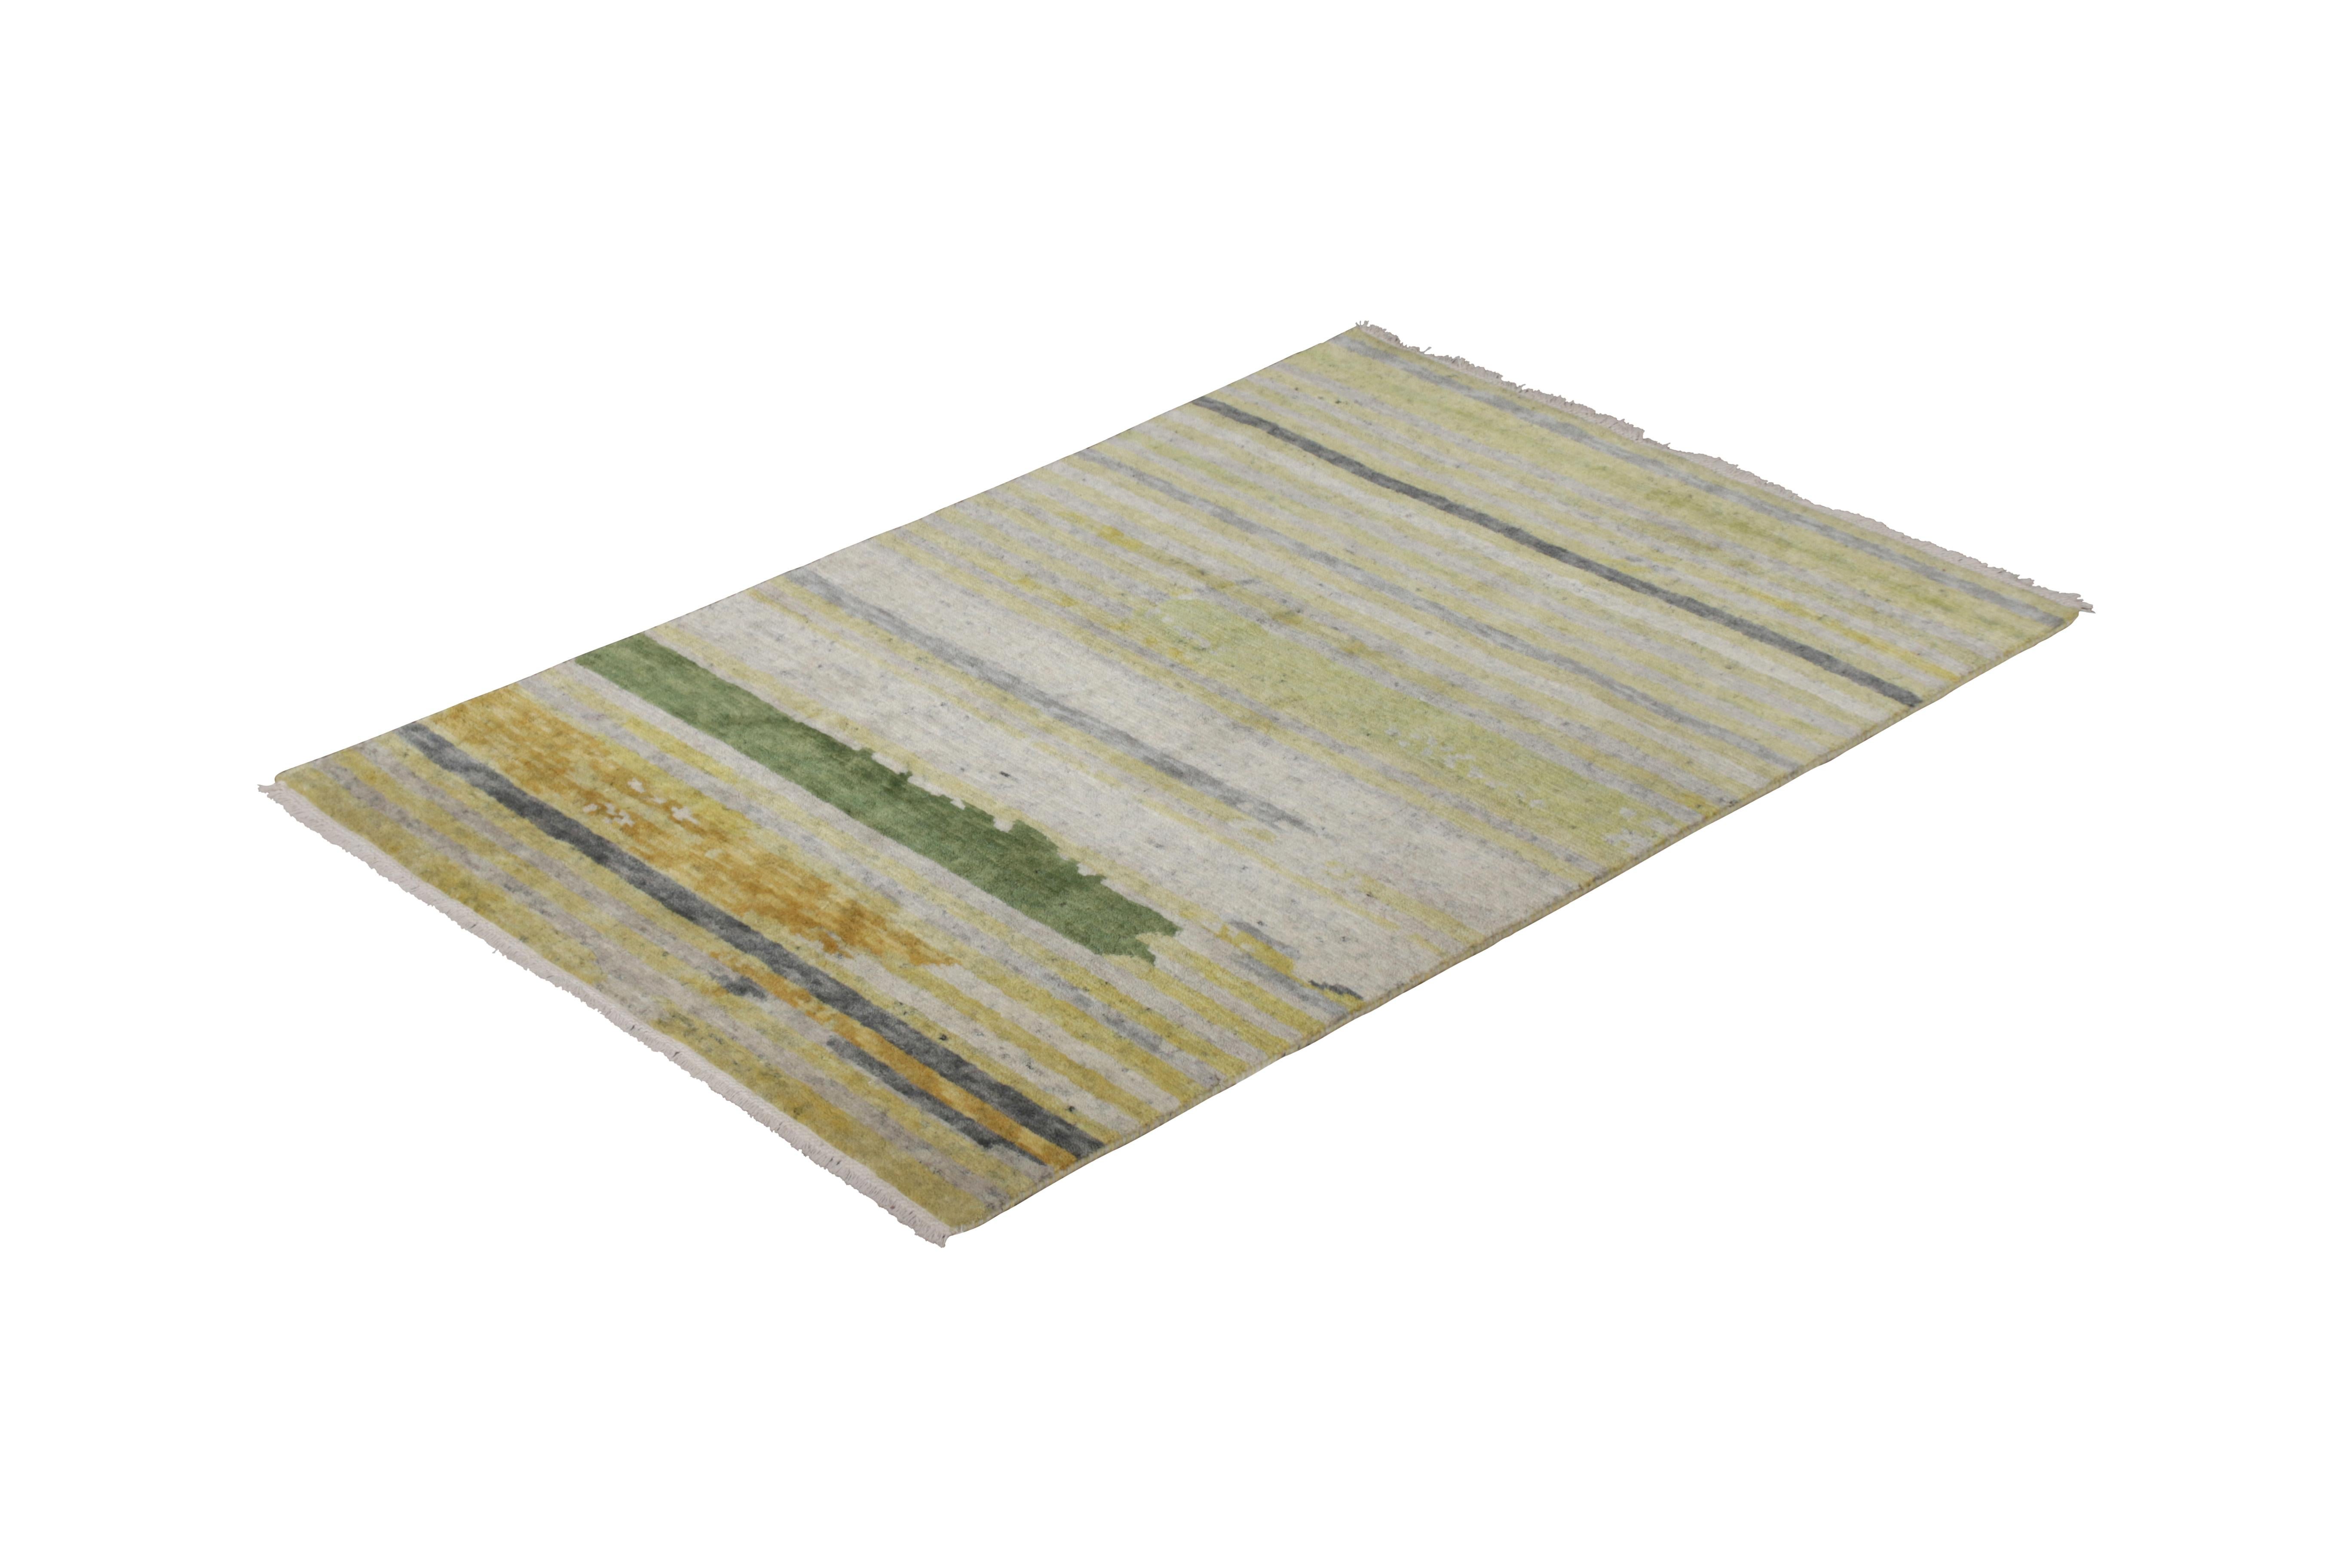 Hand knotted with a blend of quality wool, all-natural silk, and exotic yarns, this 4 x 6 modern rug joins the new and modern rug collection by Rug & Kilim, enjoying a particularly unique colorway approach to contemporary stripe patterns like this